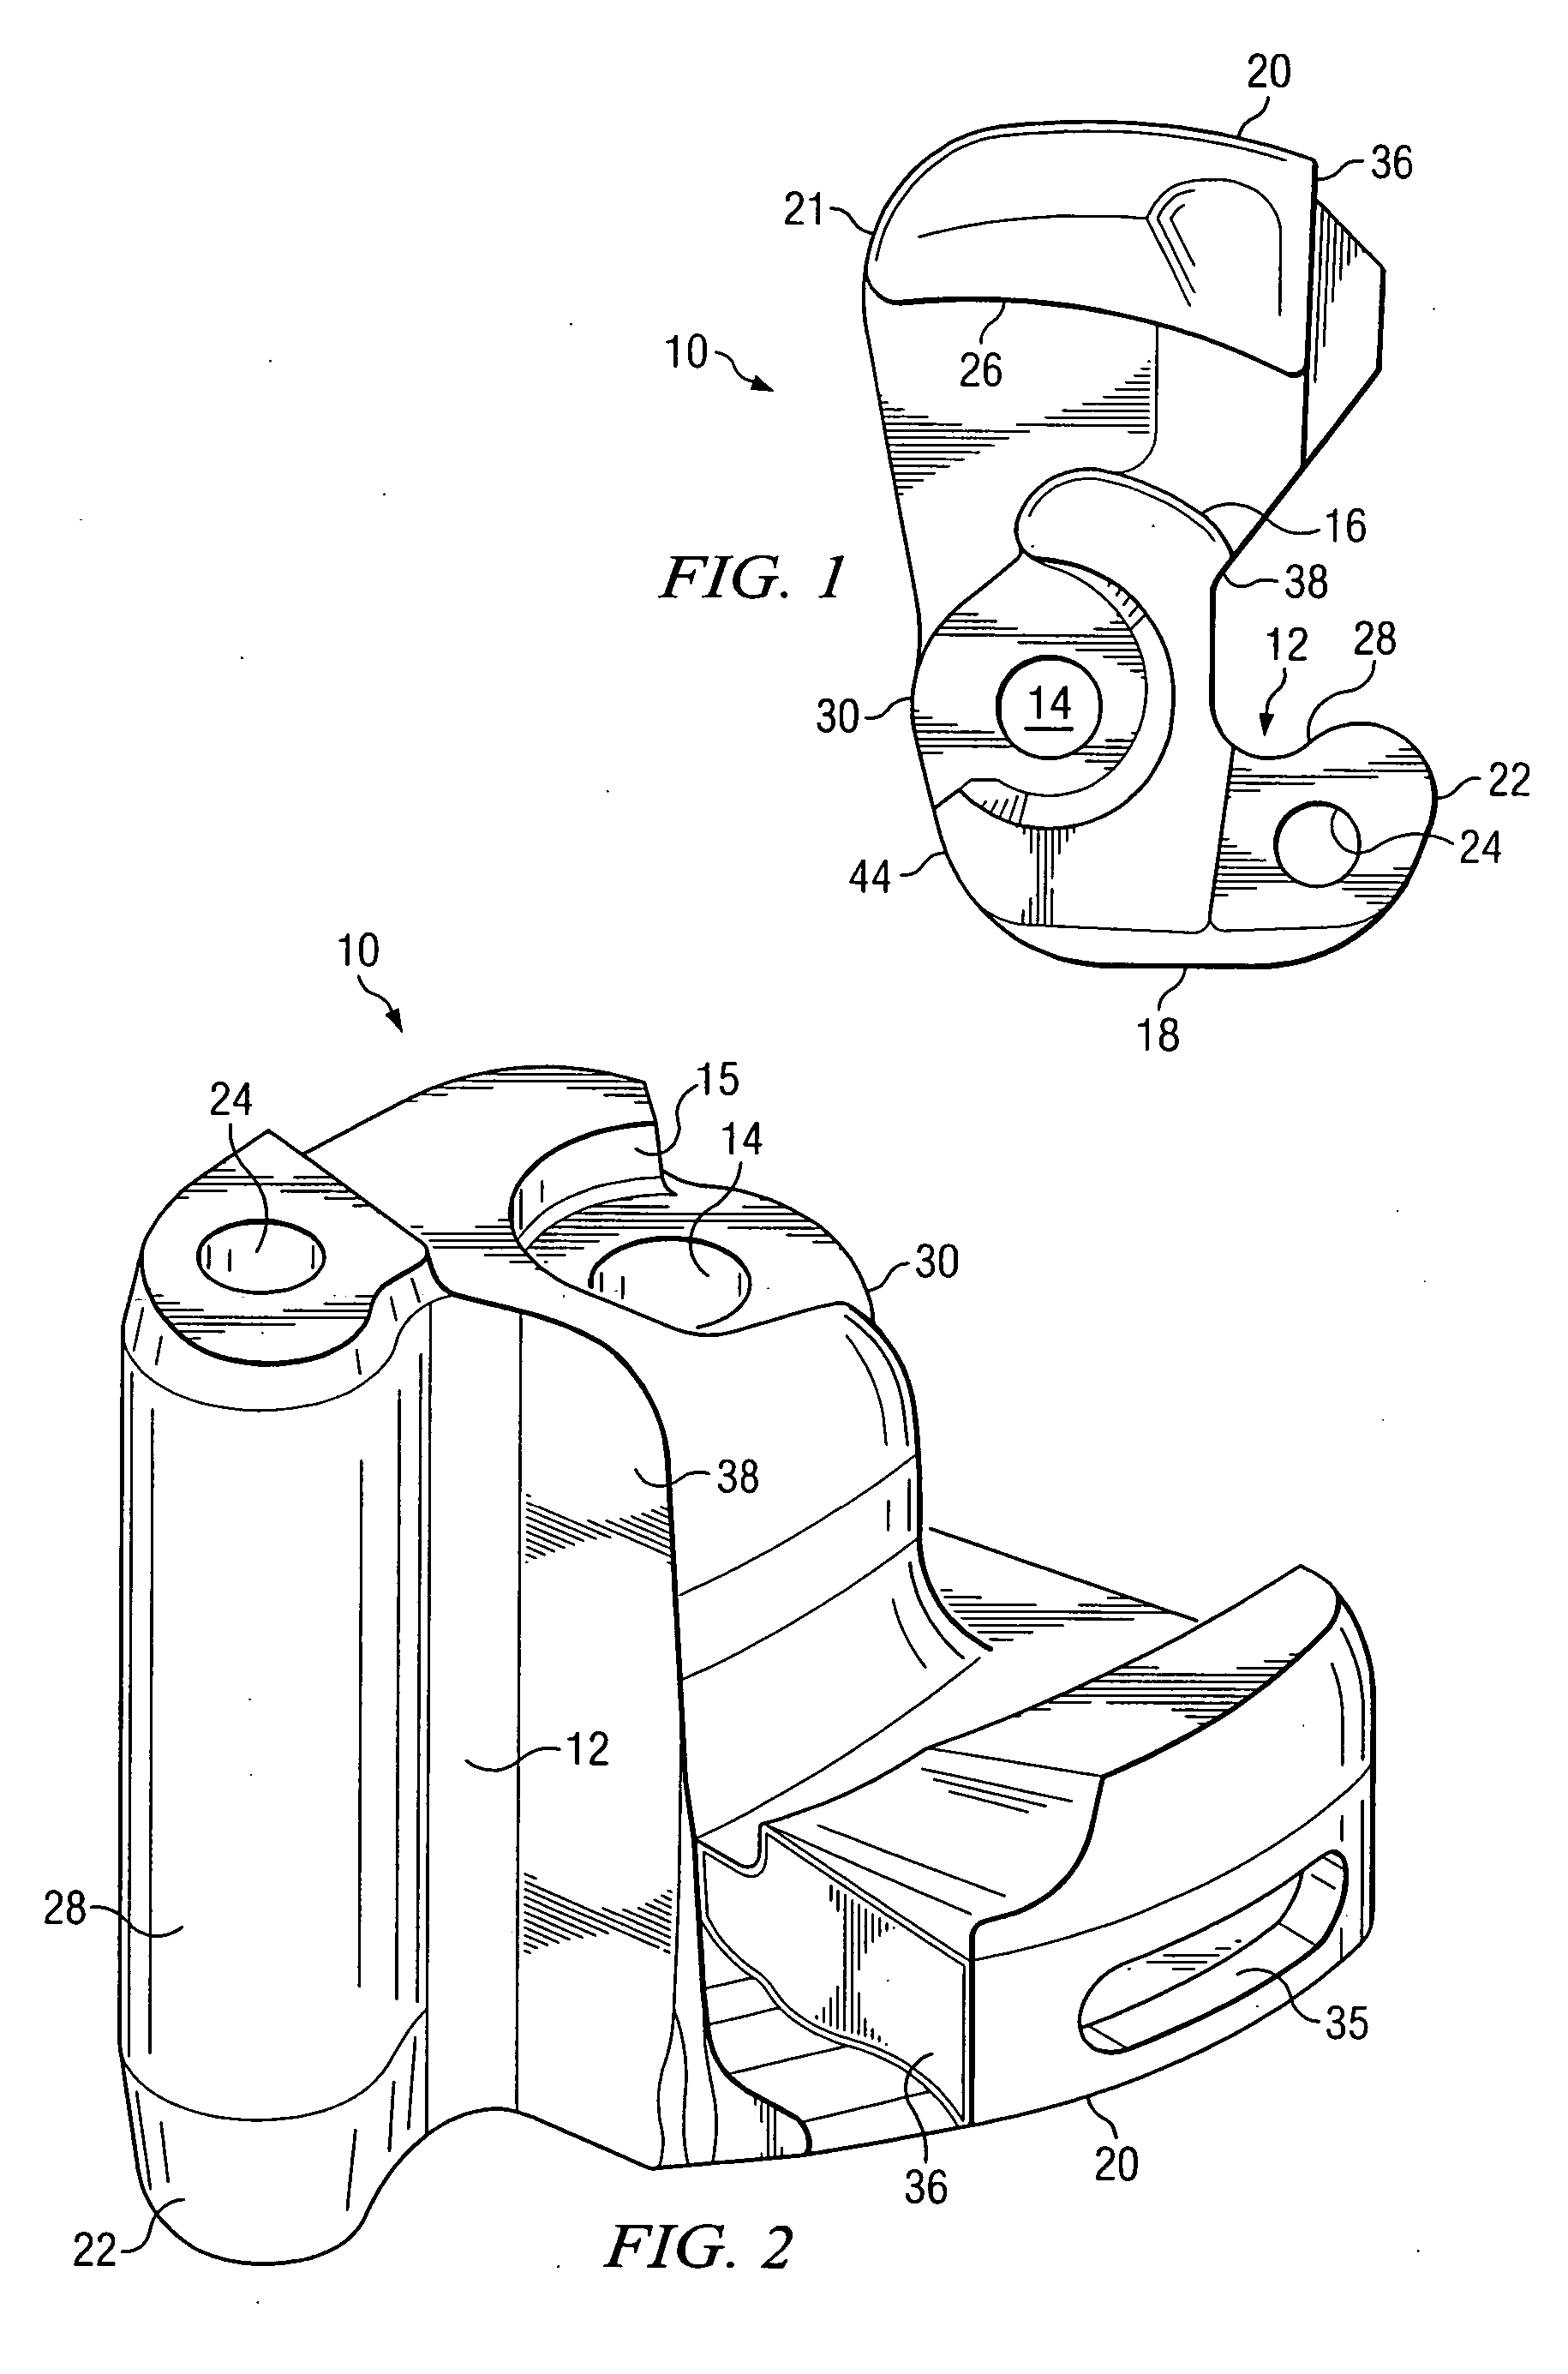 Method and system for manufacturing a coupler knuckle